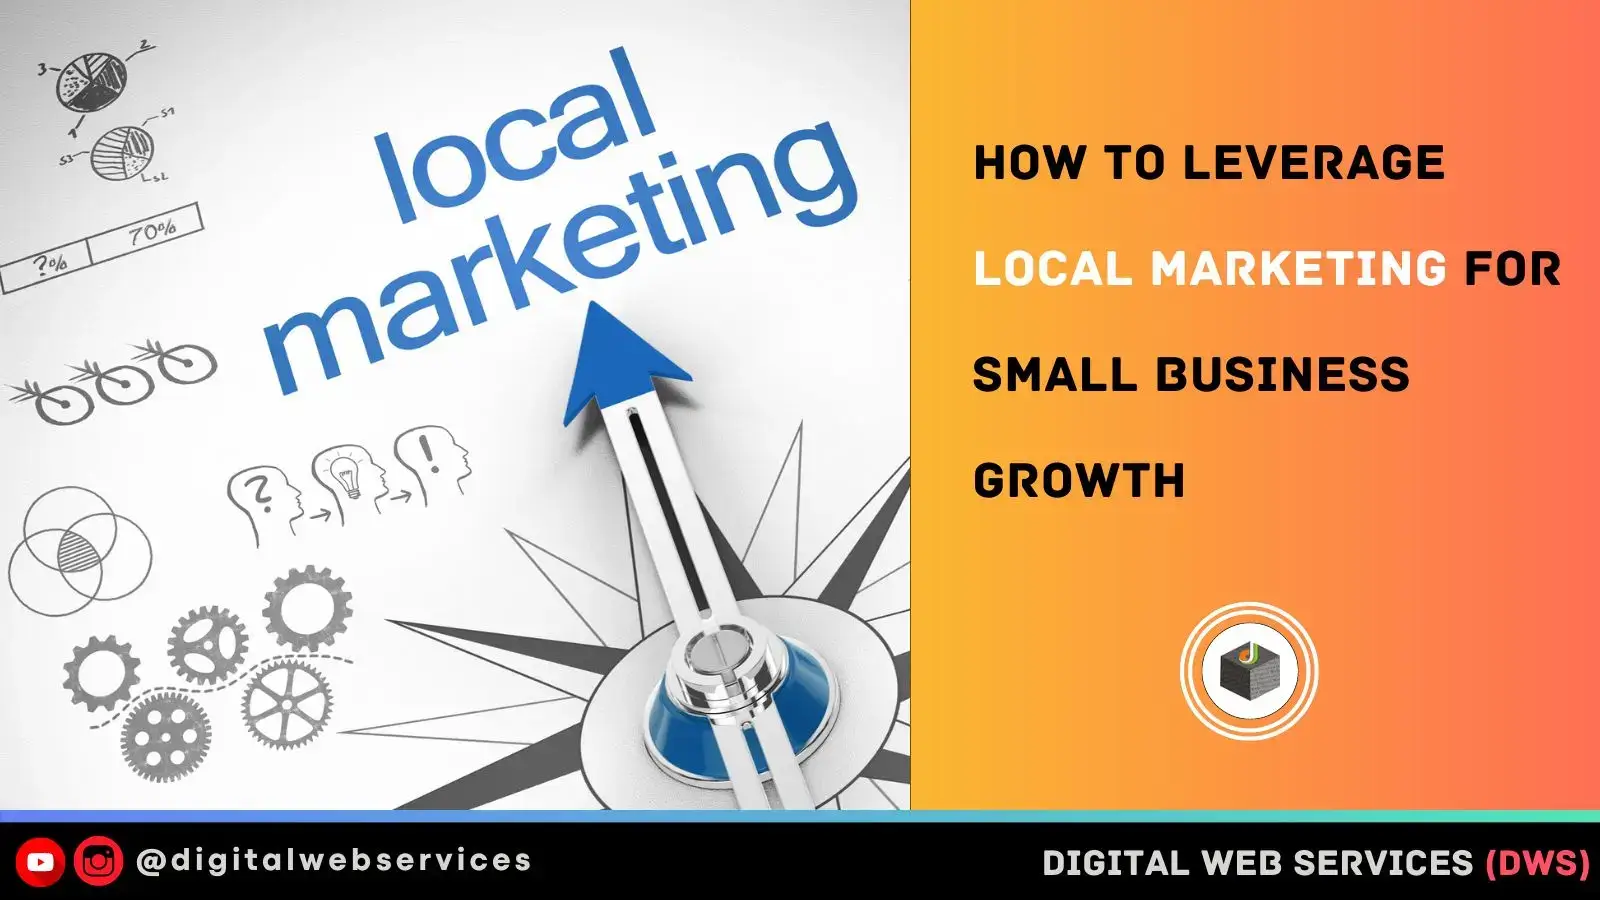 How To Leverage Local Marketing For Small Business Growth